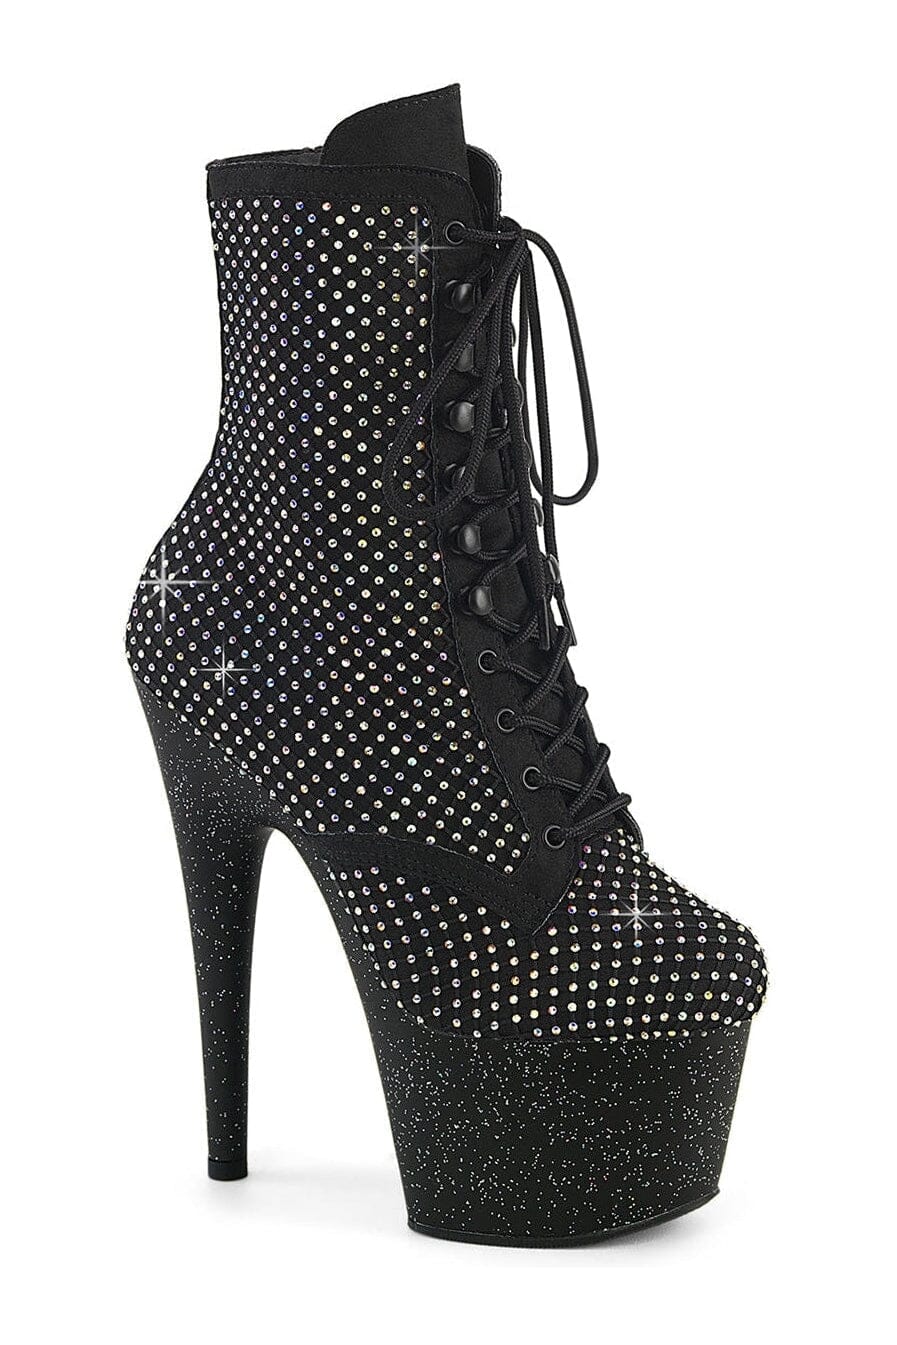 ADORE-1020RM Black Faux Suede Ankle Boot-Ankle Boots-Pleaser-Black-10-Faux Suede-SEXYSHOES.COM